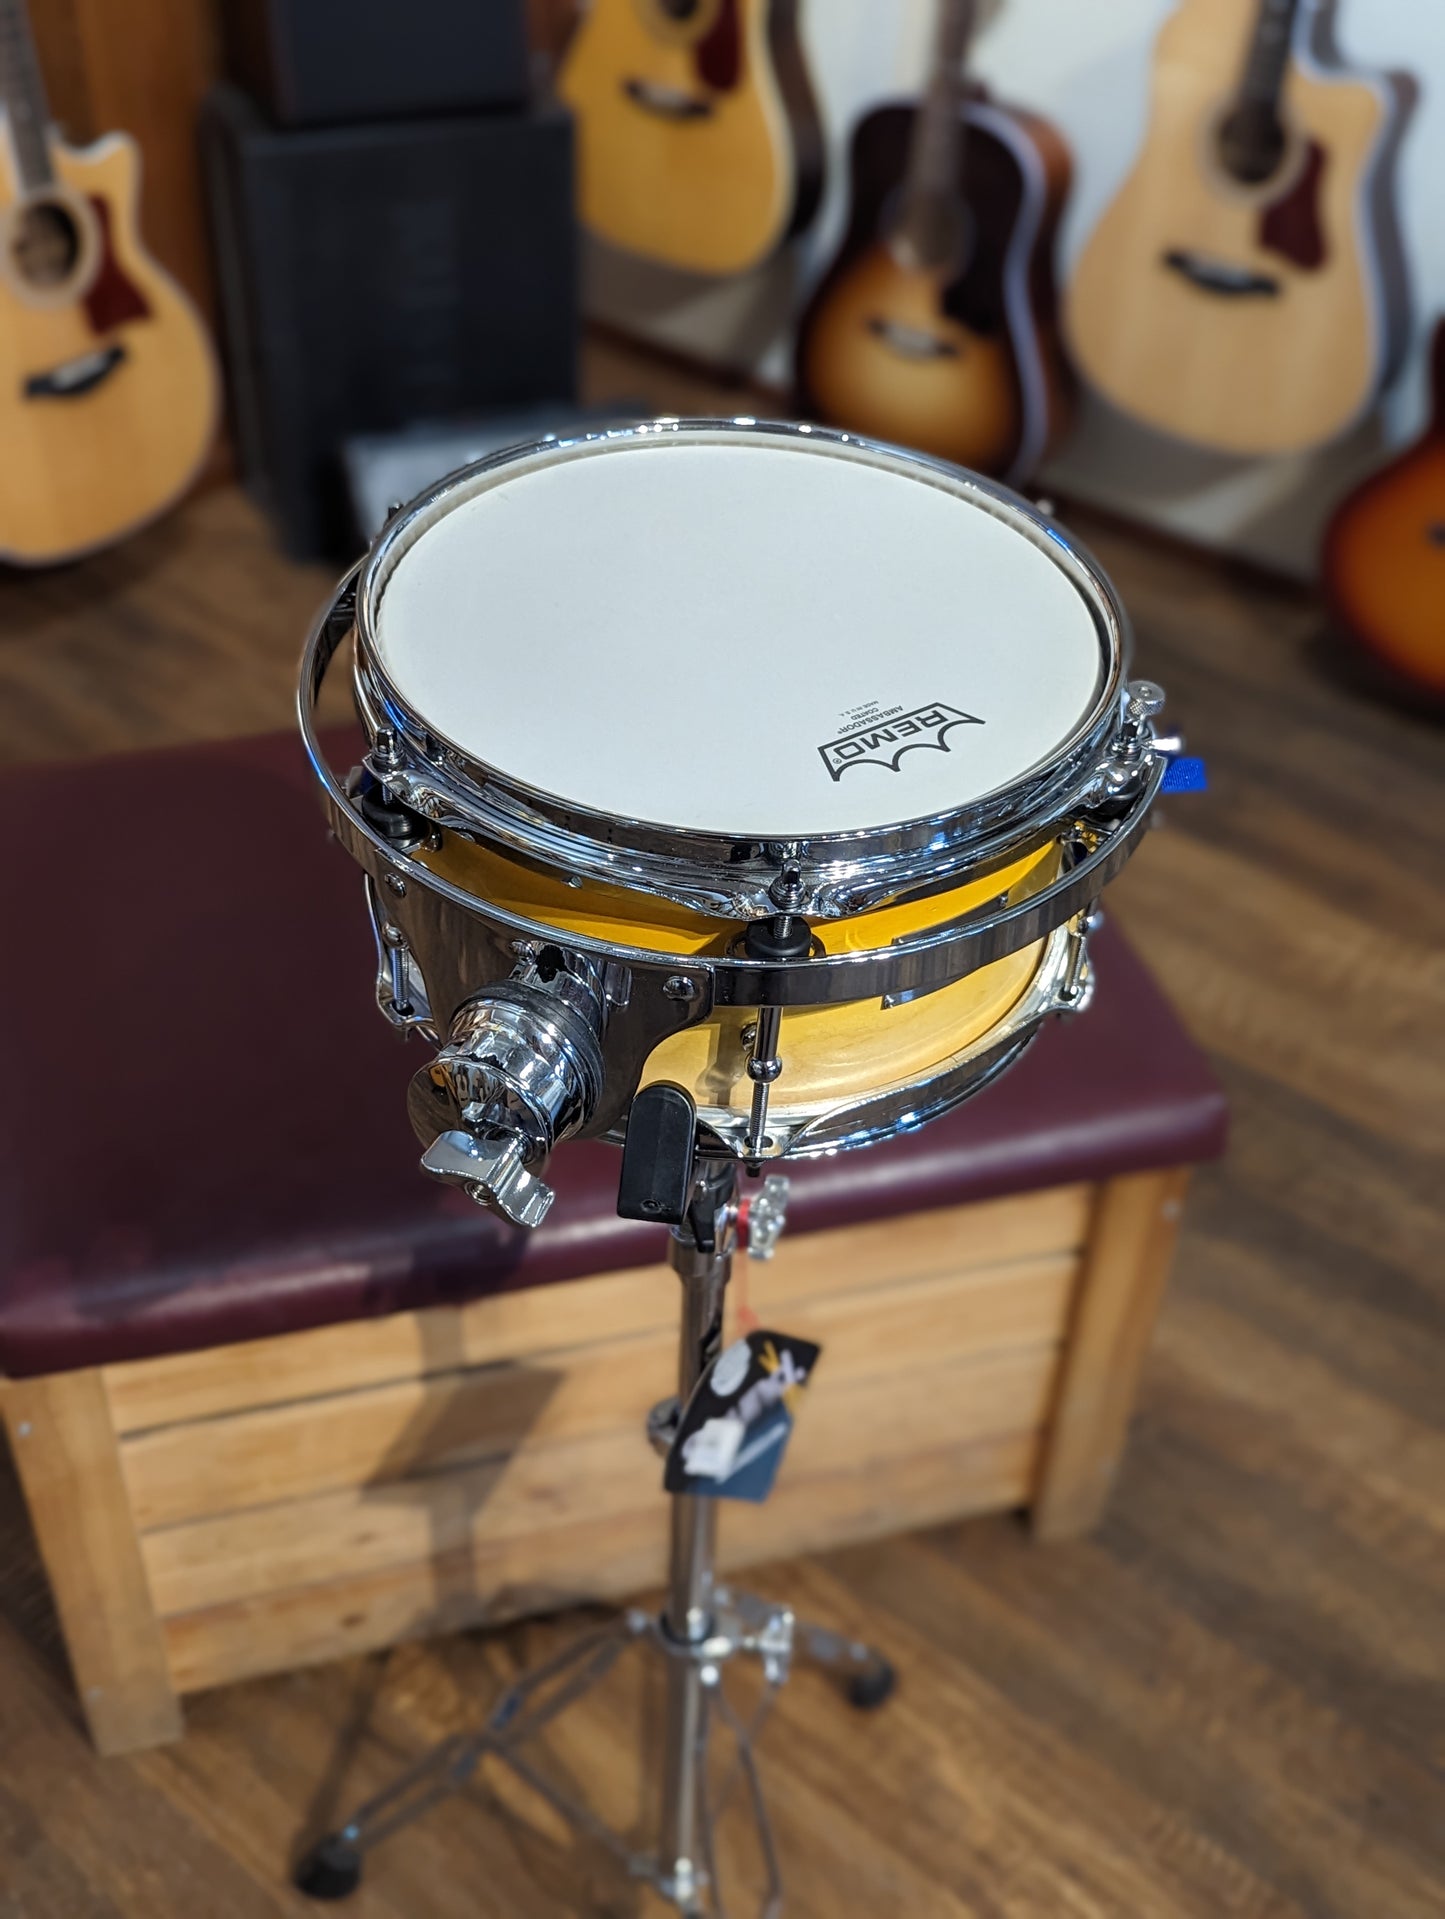 Odyssey Drums 10"x5" 6 Ply Maple Snare w/Mounting Hardware - Yellow Fade